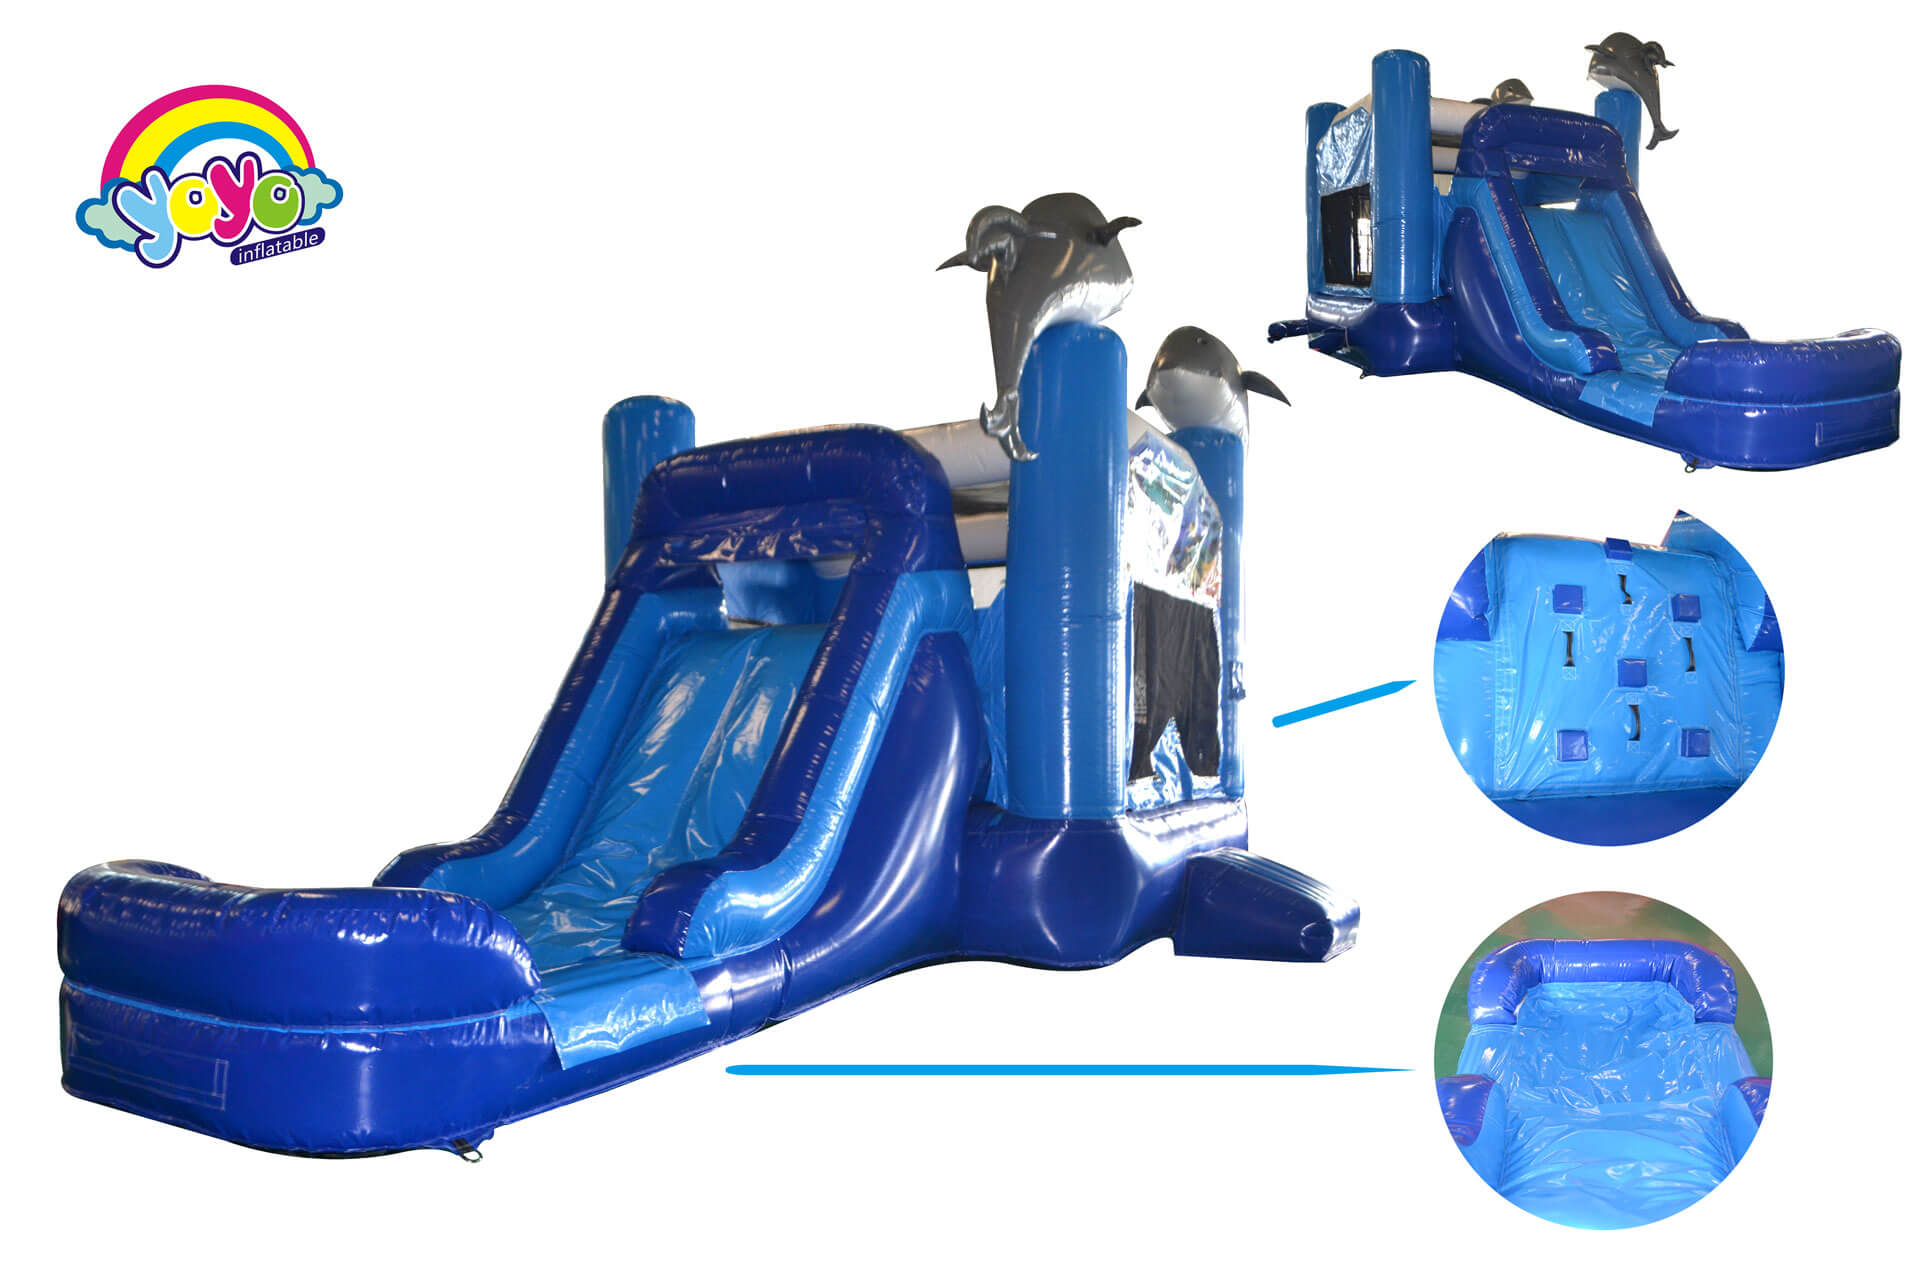 Guangzhou YoYo Amusement Toys Co., Ltd Supplies a Wide Range of Inflatable Bounce Houses With Quality Materials To Increase Performance, Safety, and Durability